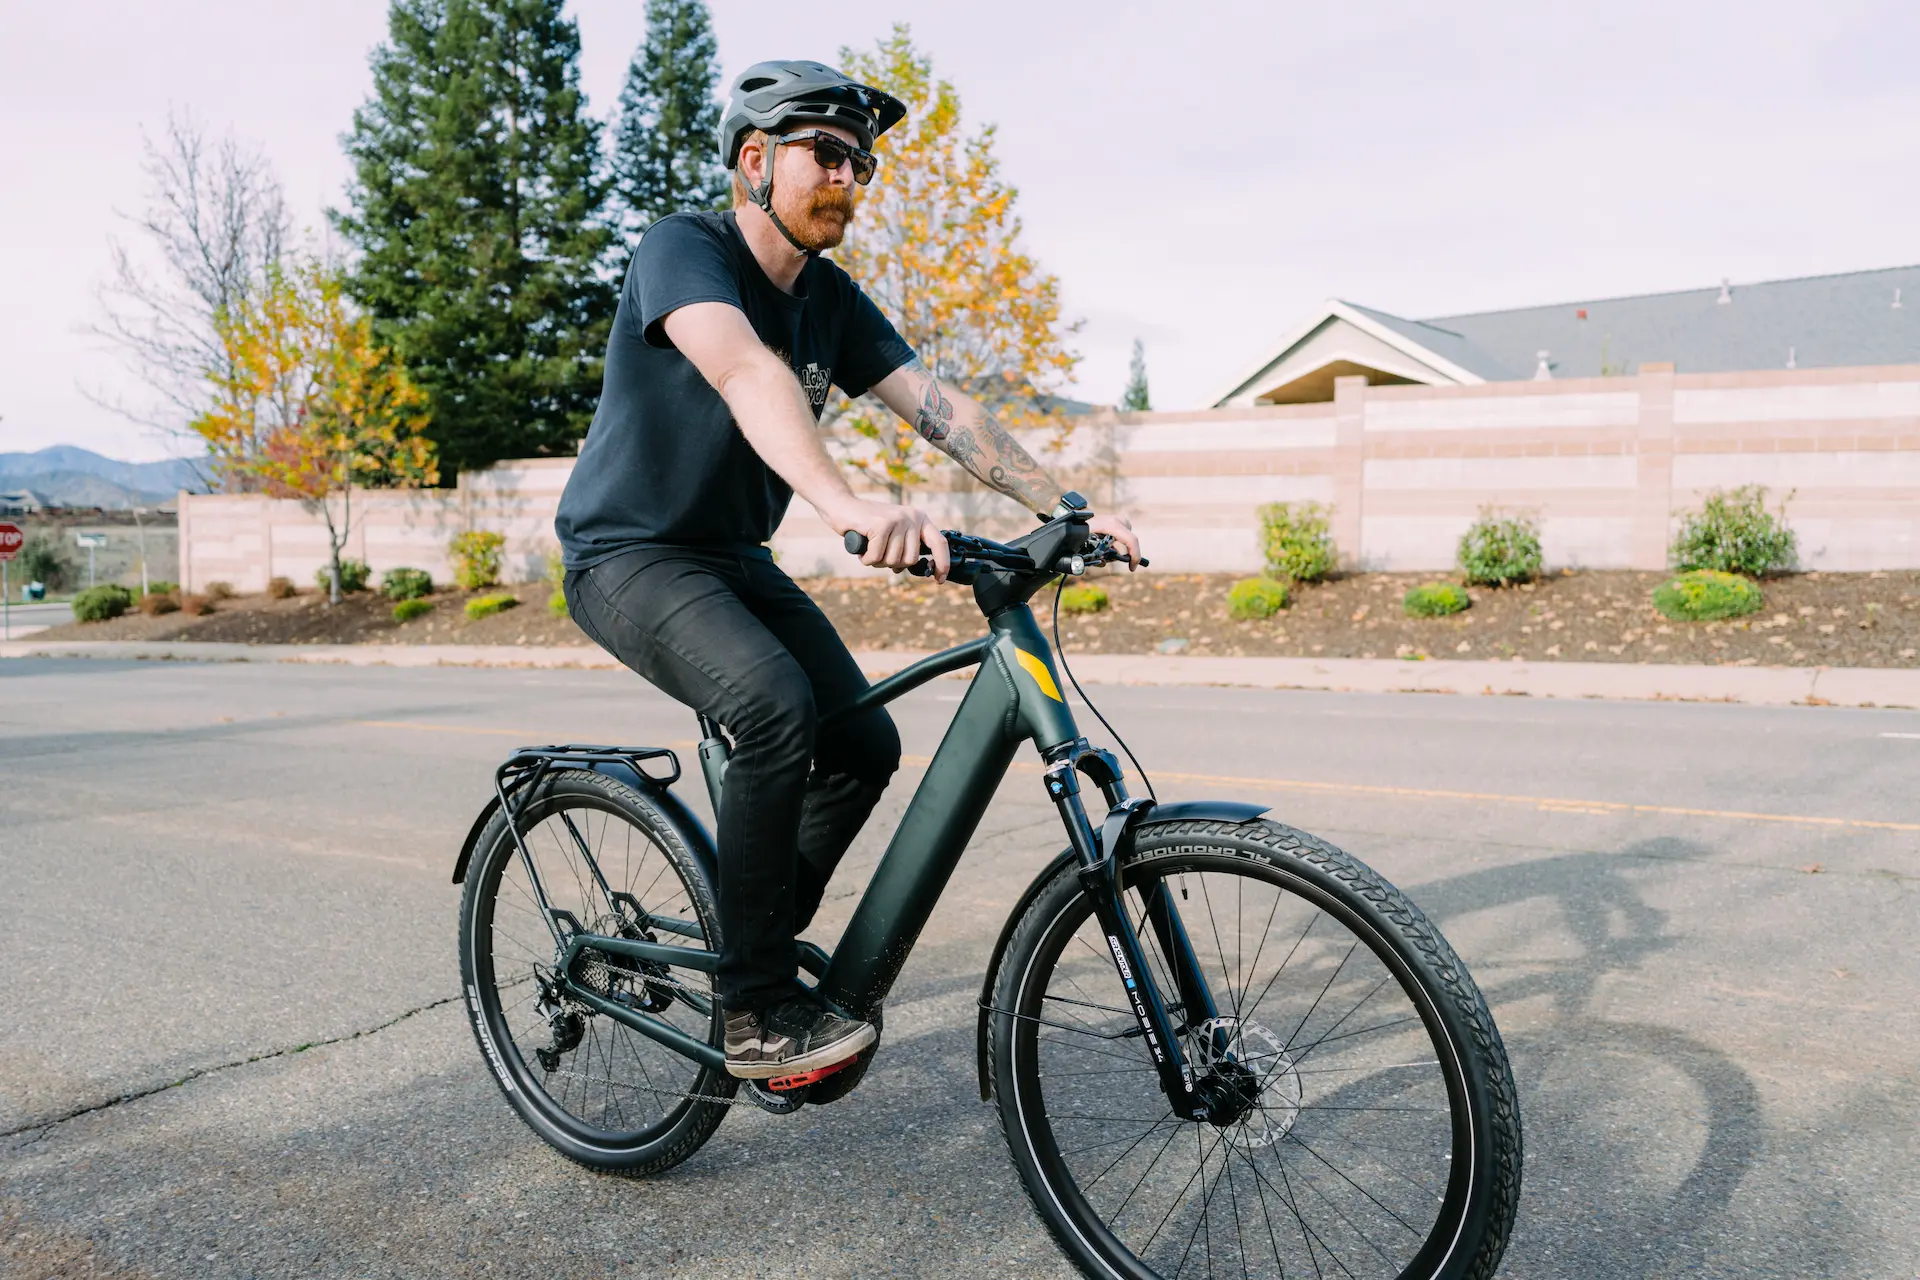 State Bicycle Co. 6061 - eBike Commuter - Matte Black